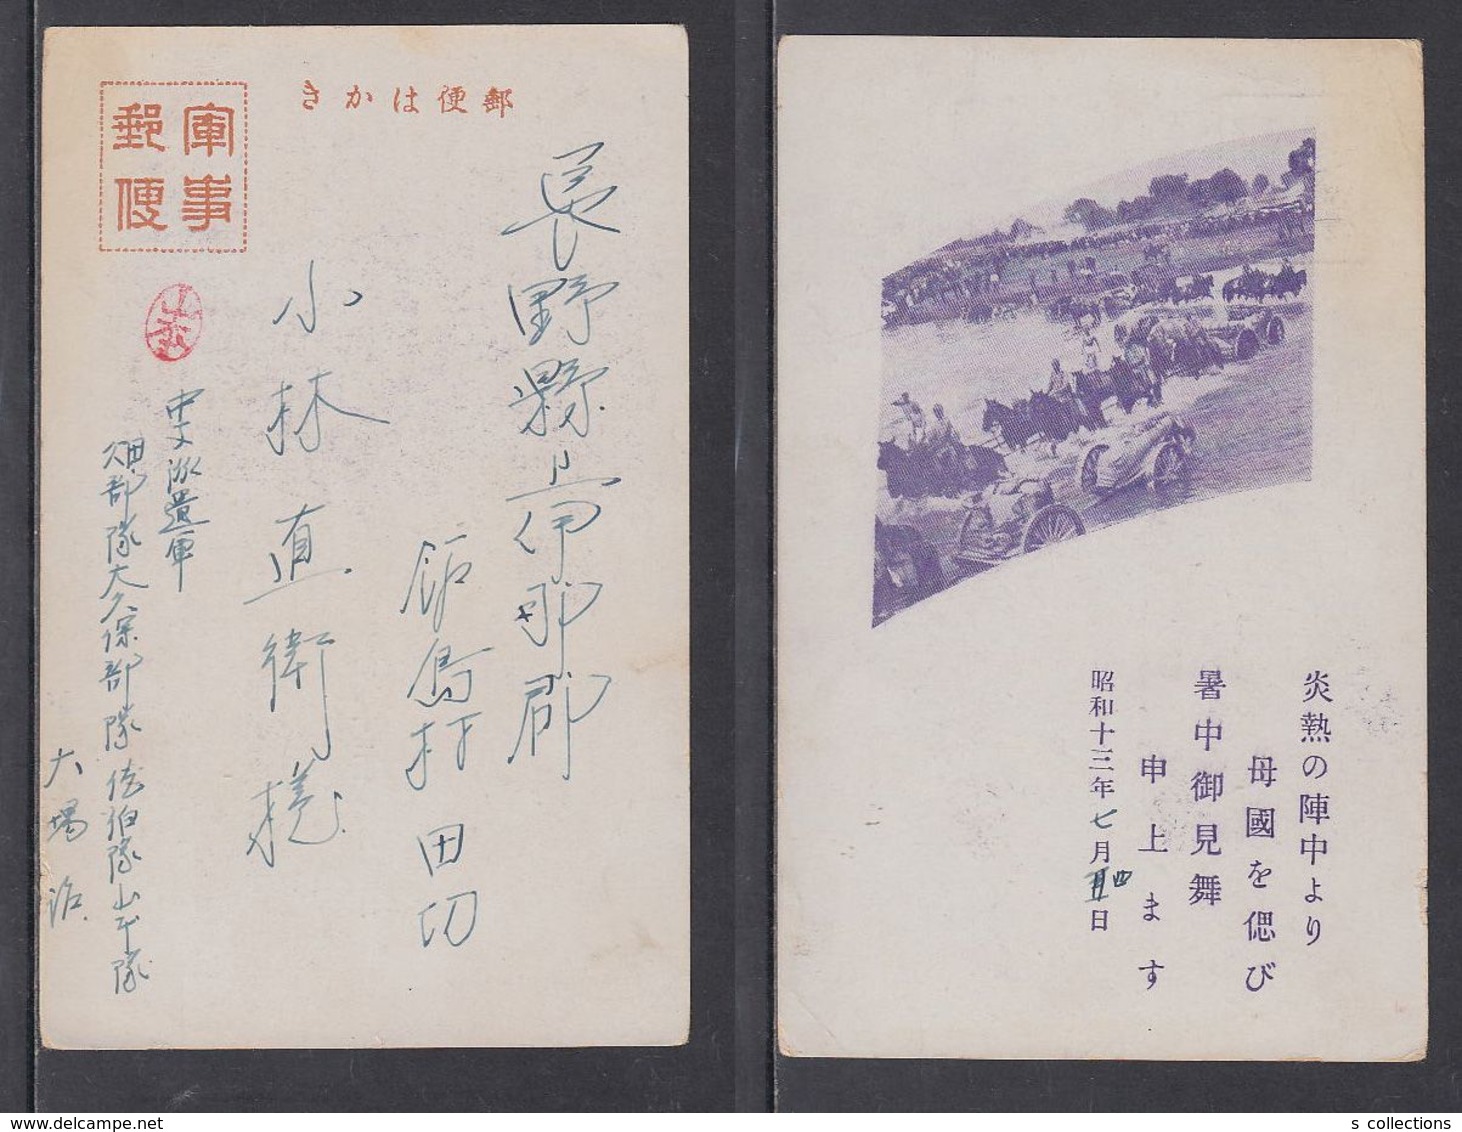 JAPAN WWII Military Japanese Soldier Unit Picture Postcard CENTRAL CHINA WW2 MANCHURIA CHINE MANDCHOUKOUO JAPON GIAPPONE - 1943-45 Shanghai & Nanjing